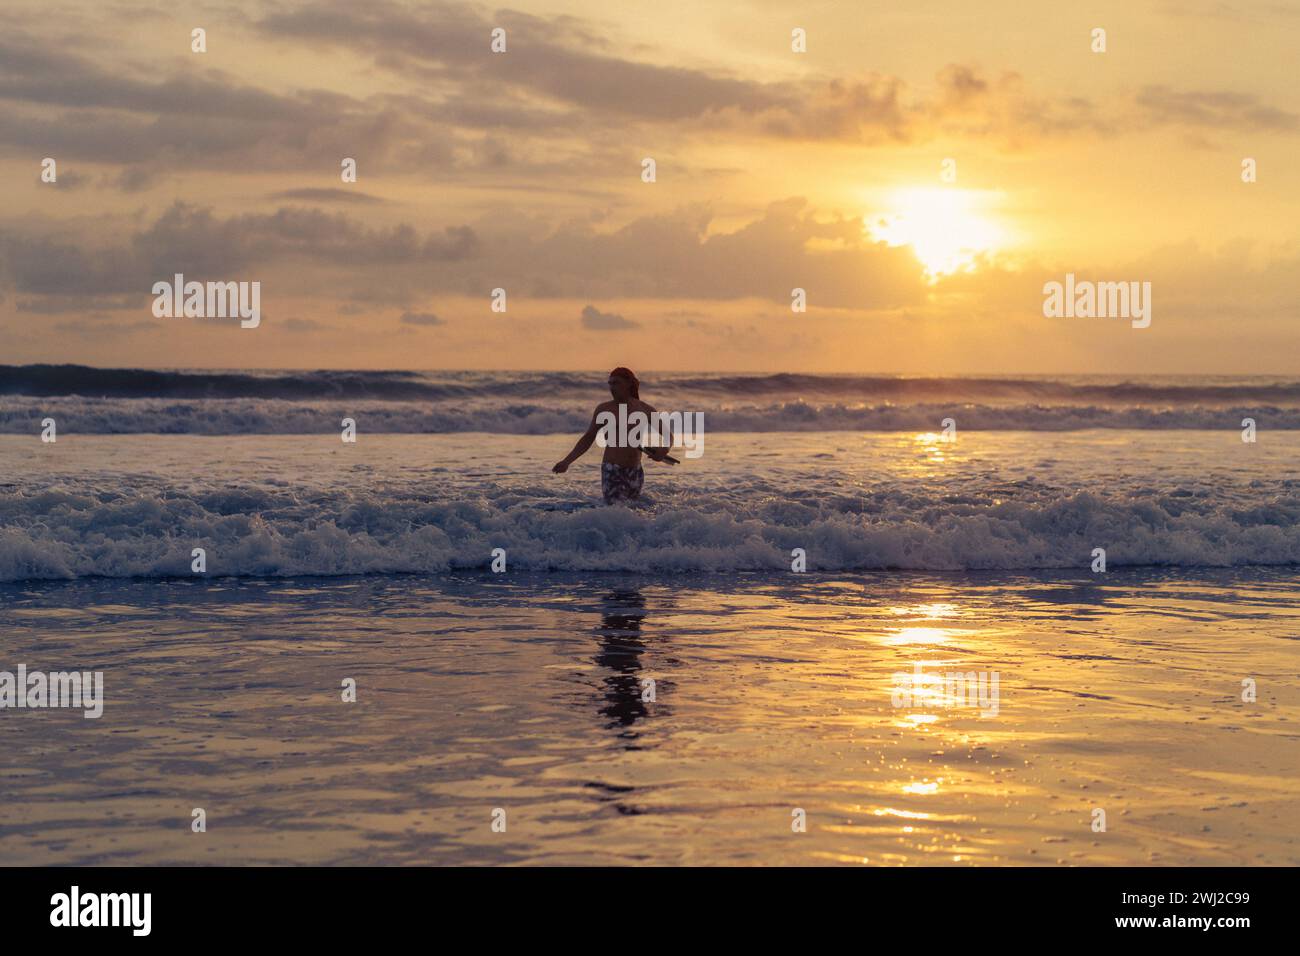 Fisherman catches fish with a net in the ocean at sunset, Bali. Stock Photo